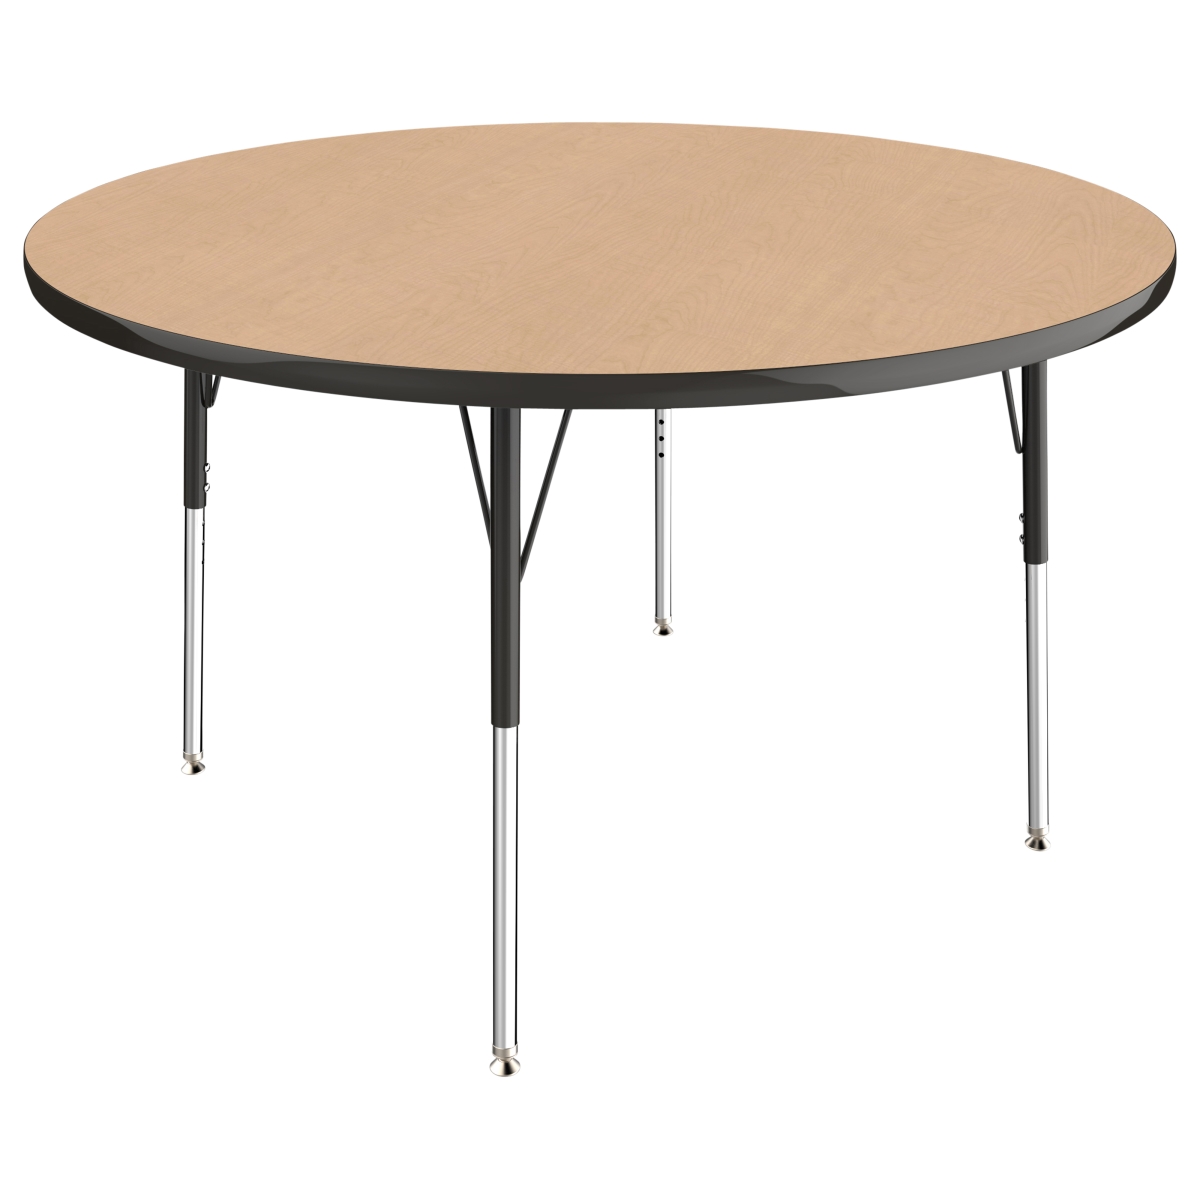 10043-mpbk 48 In. Round T-mold Adjustable Activity Table With Standard Swivel - Maple & Black